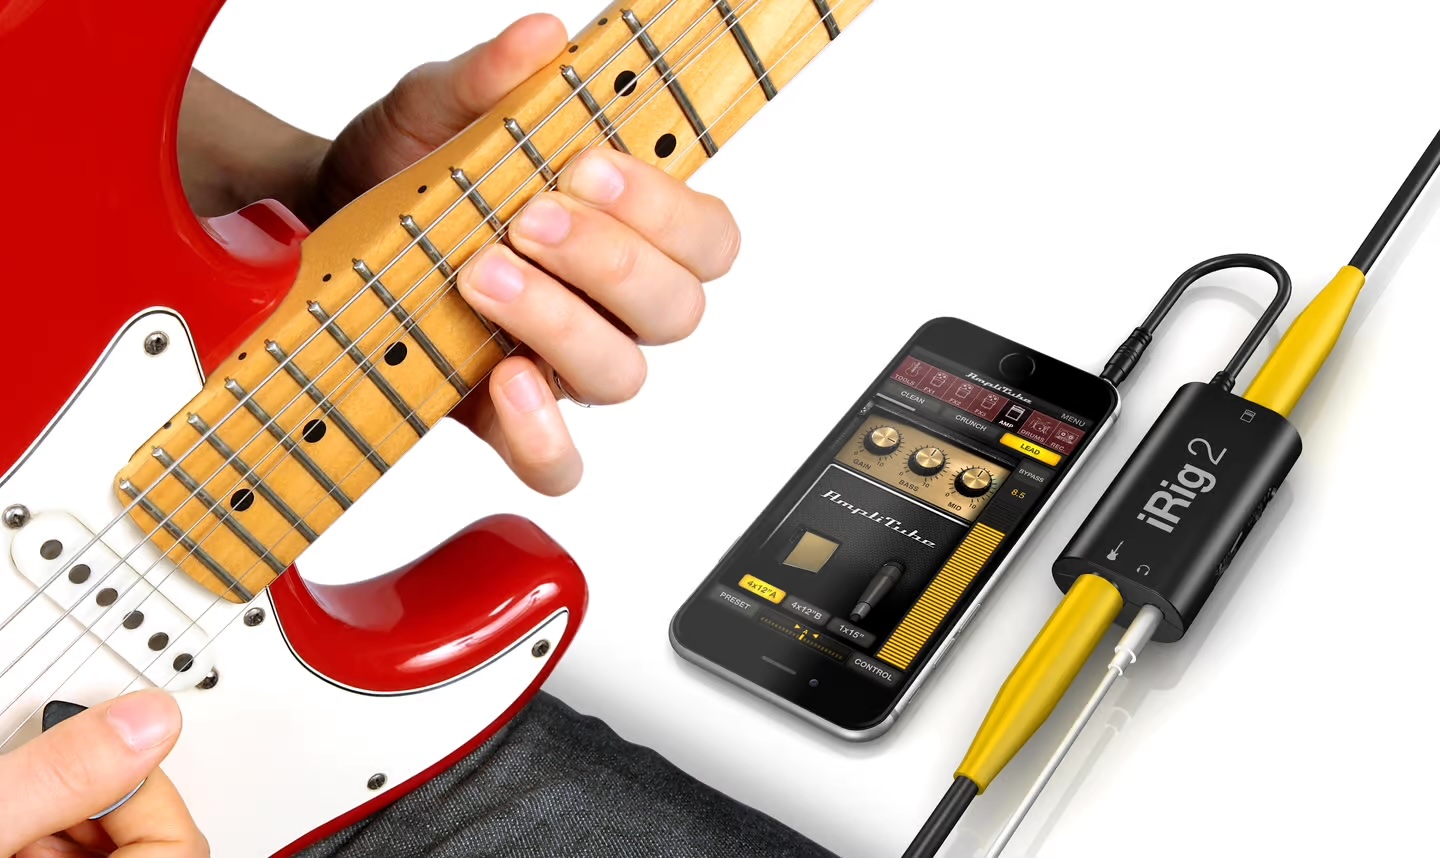 Review of Guitar Effects App